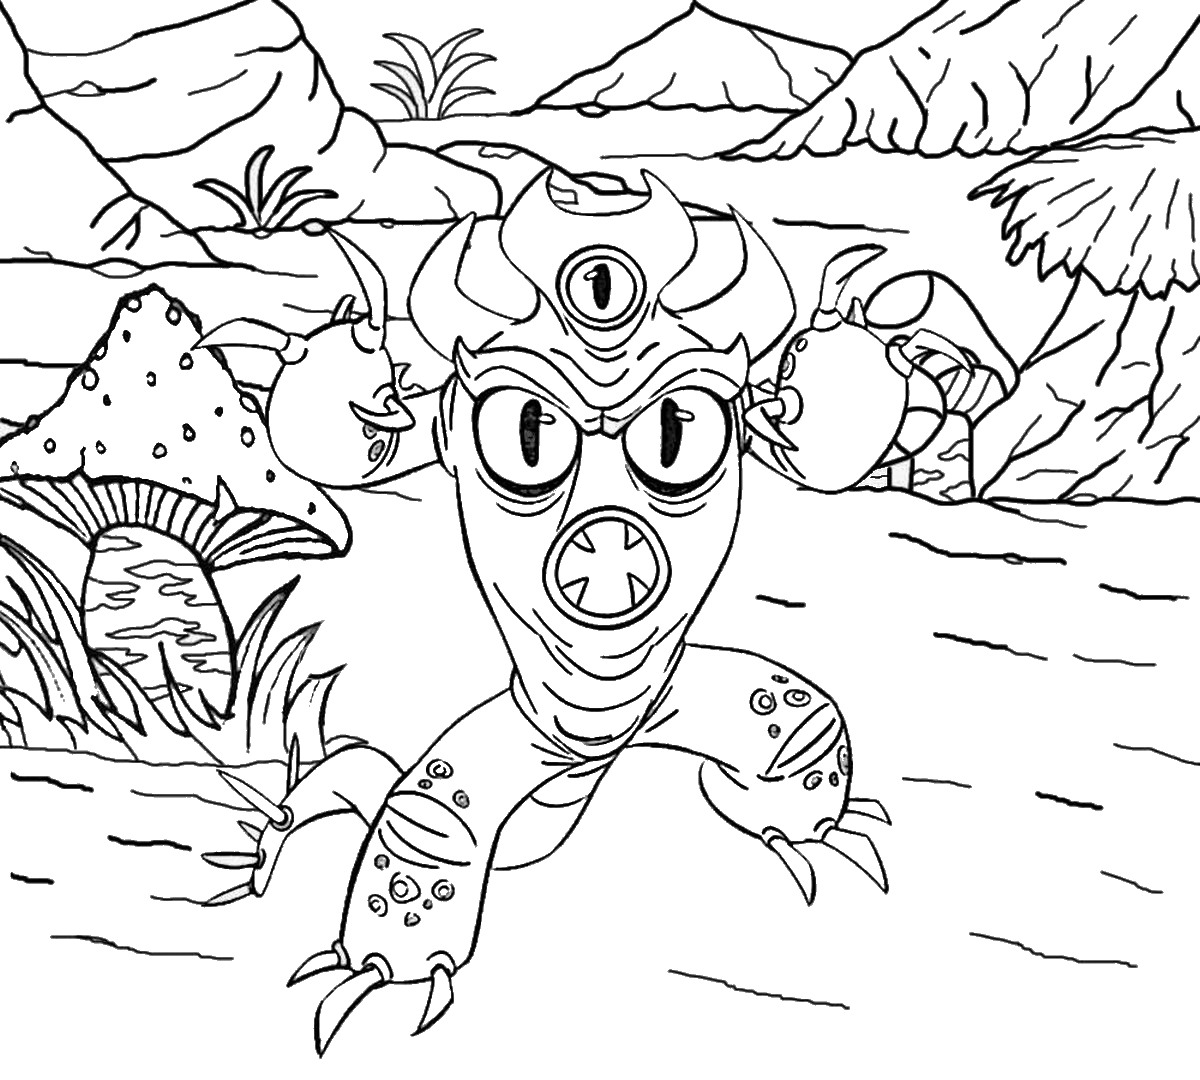 Fred Scared Style Coloring Page   Free Printable Coloring Pages ...